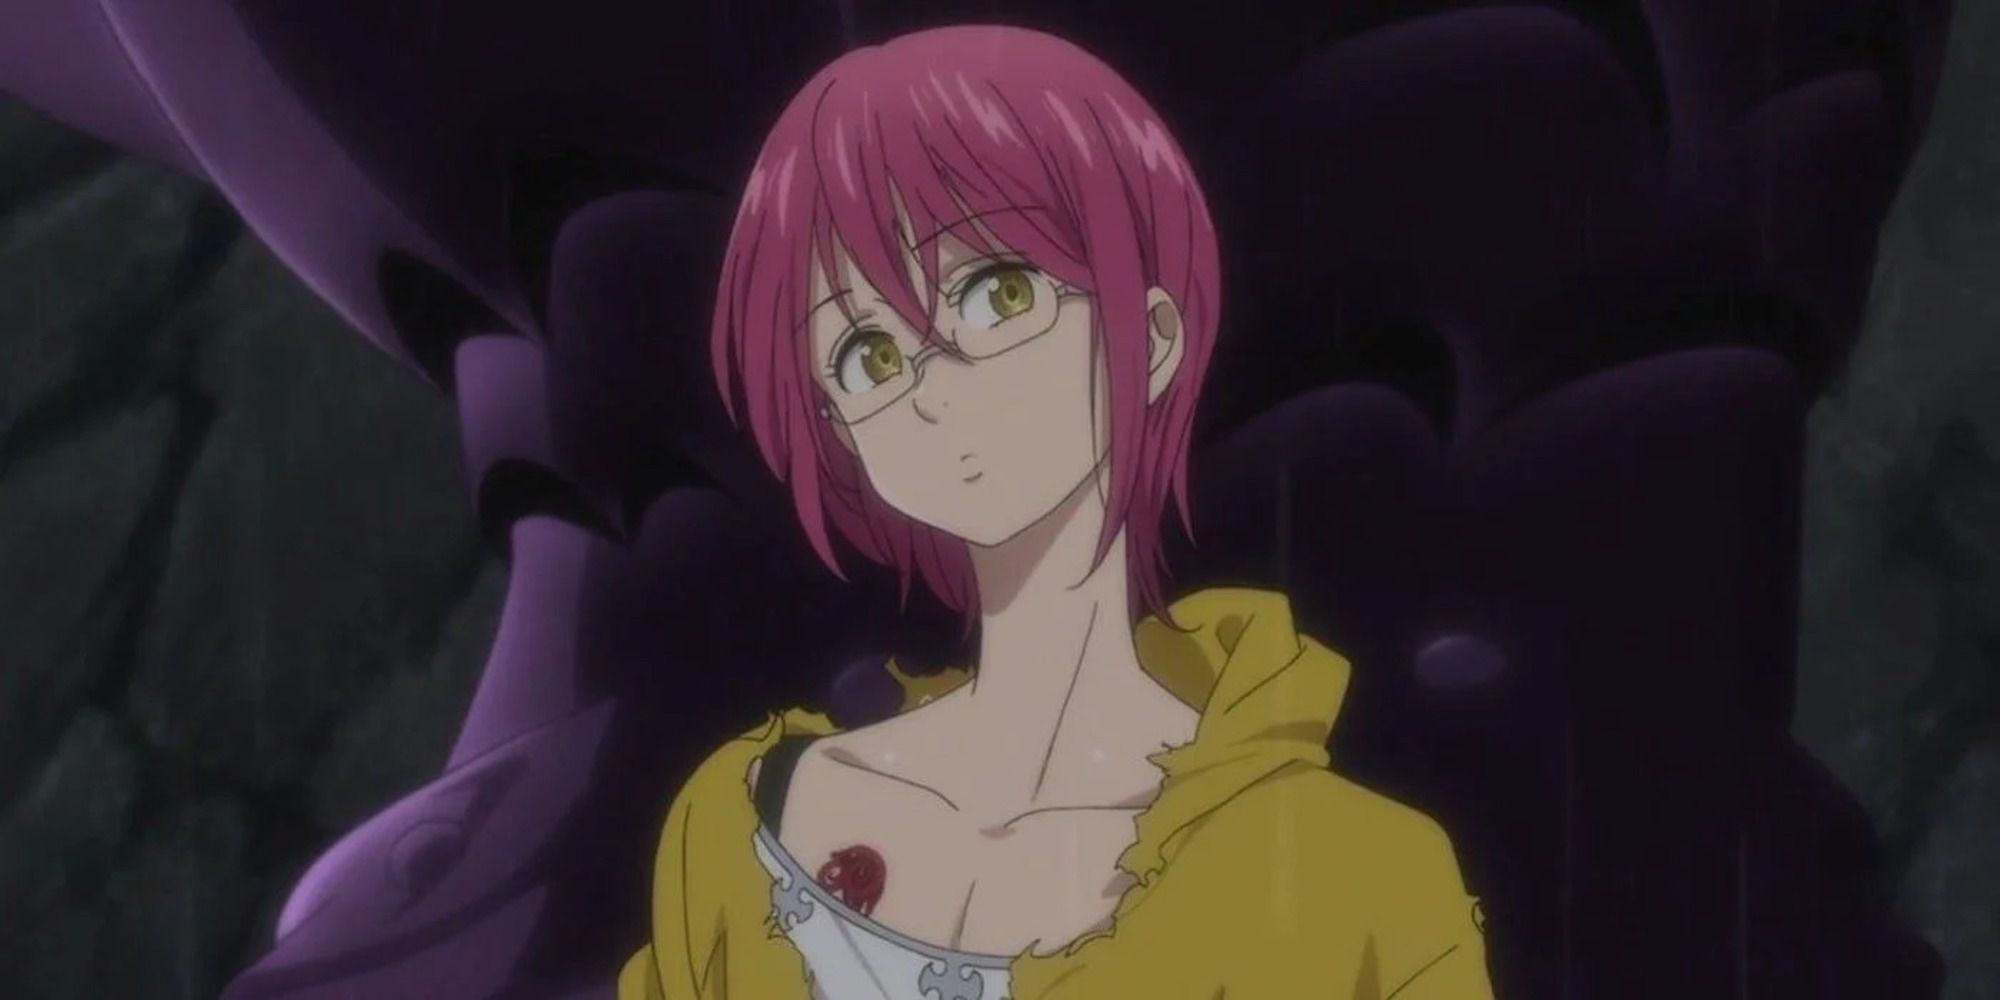 Gowther from 7 Deadly Sins